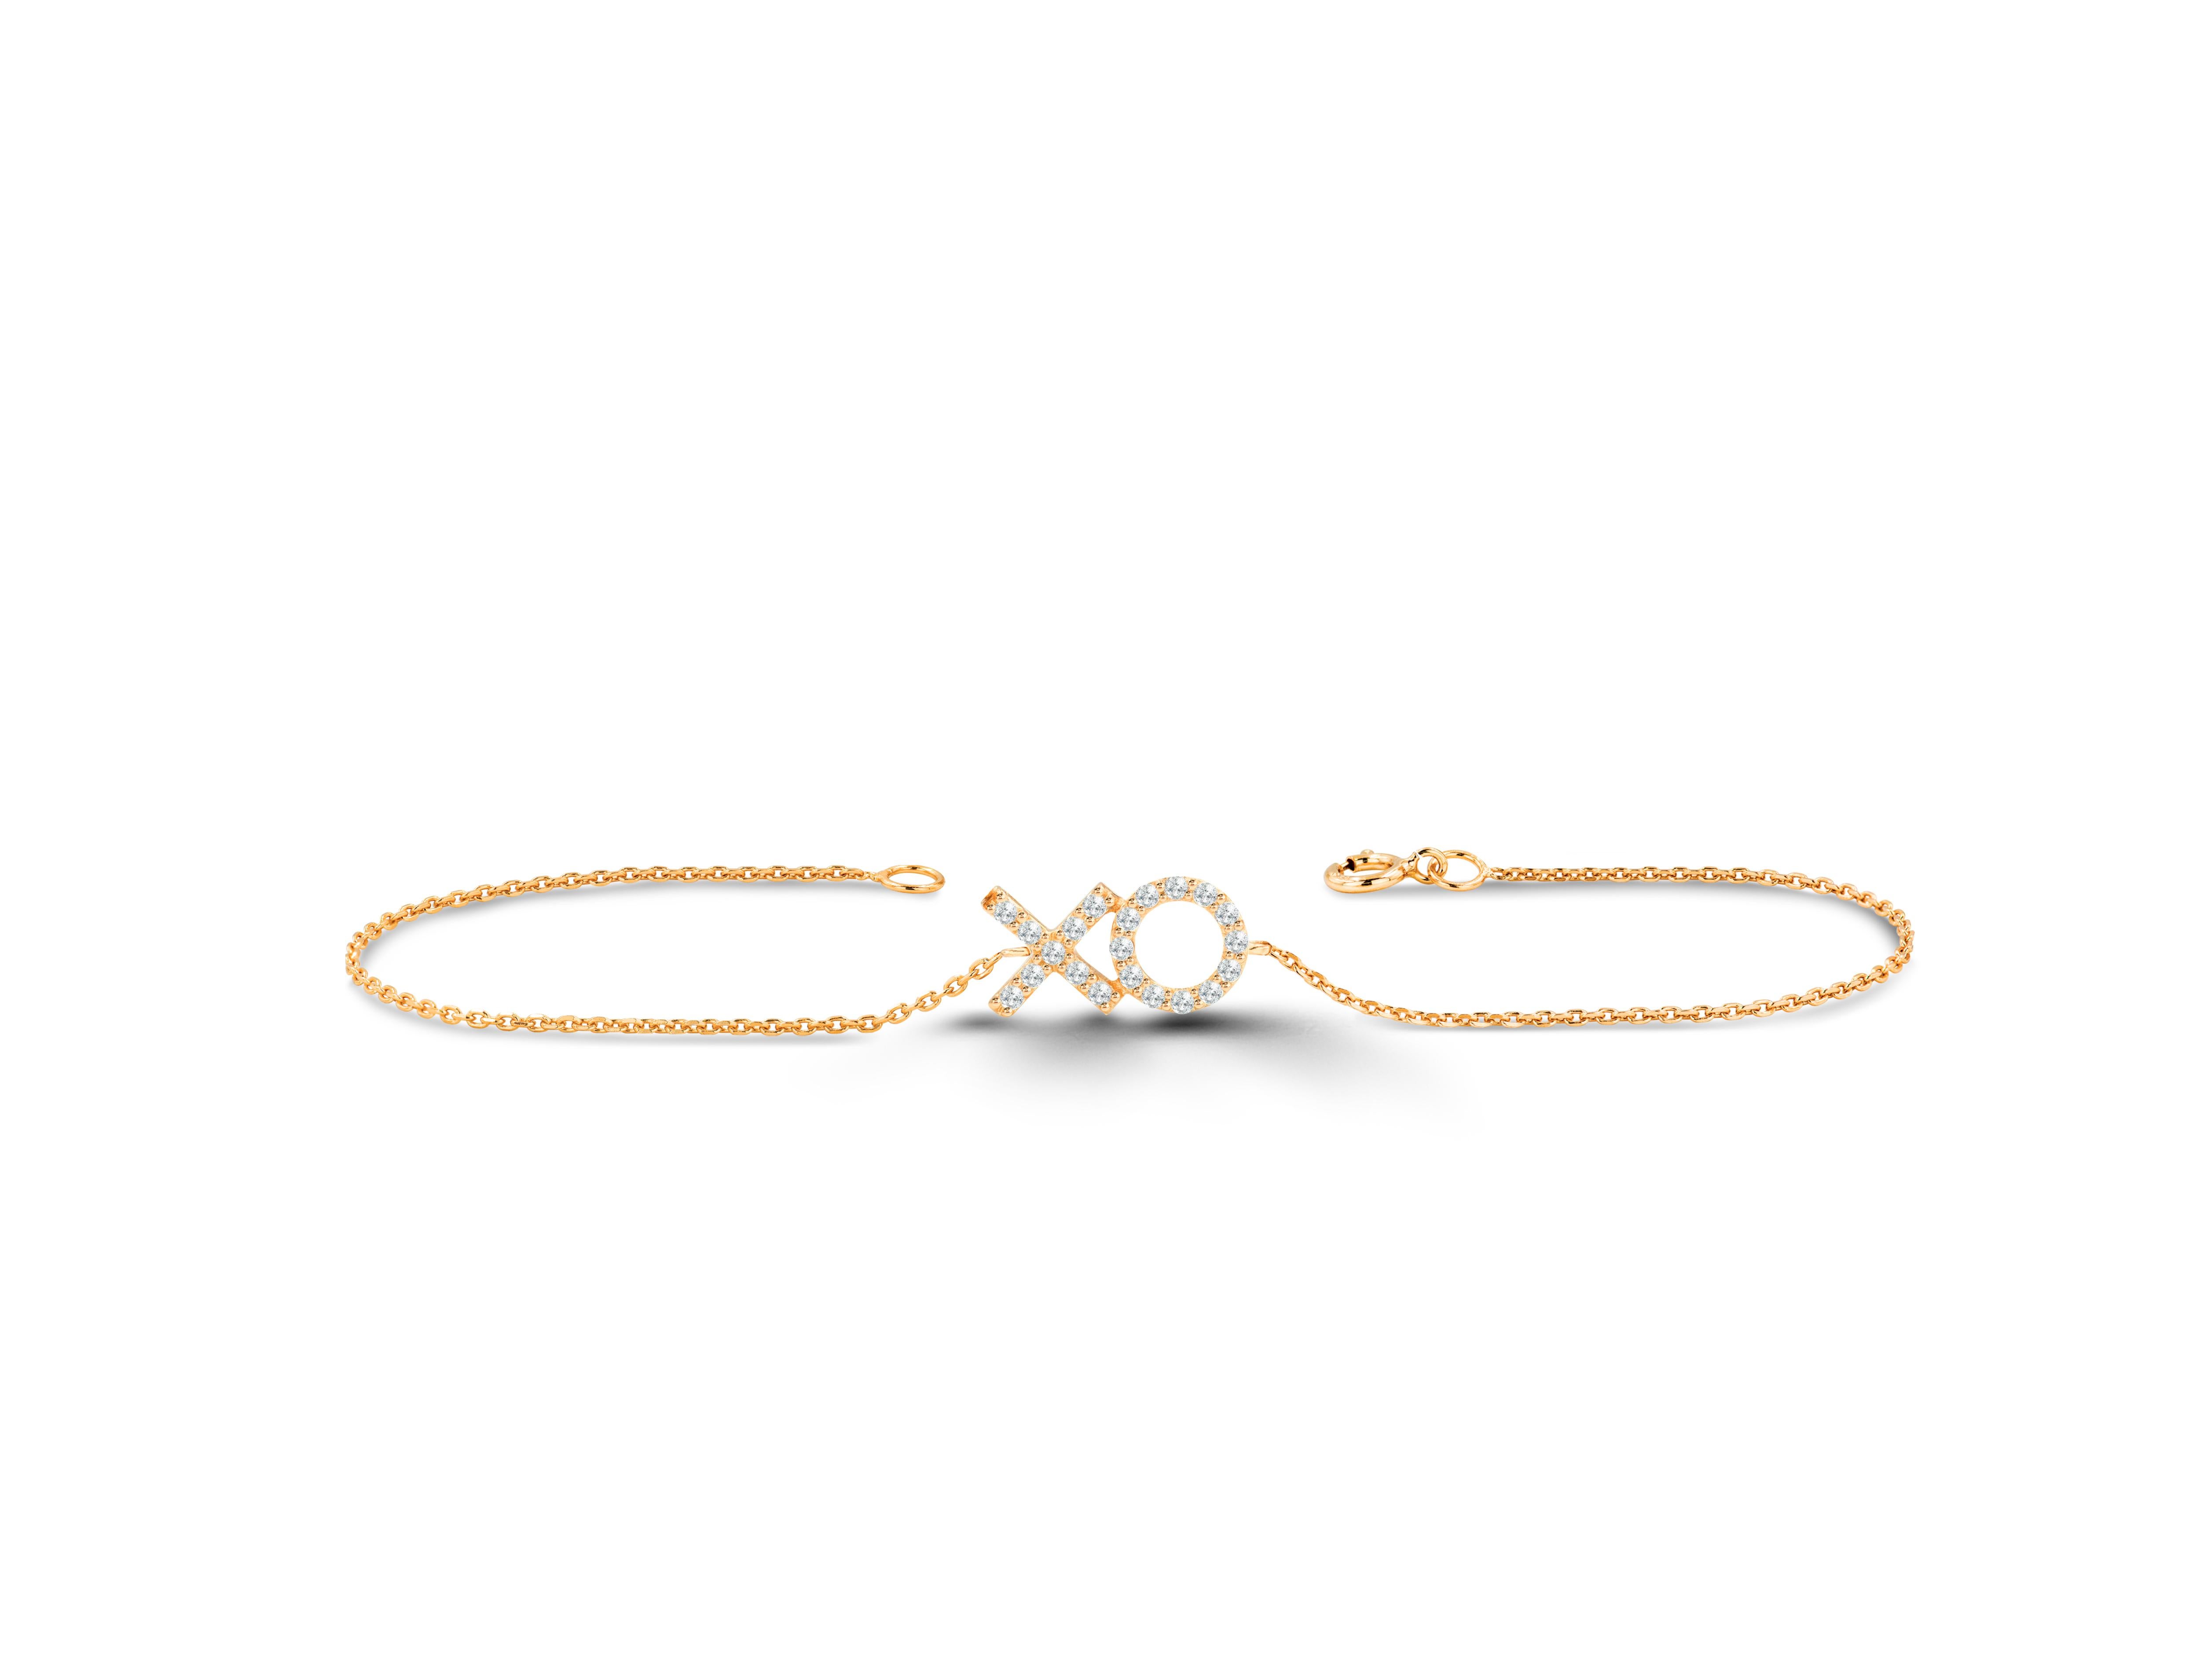 Beautiful and elegant, this XO XO bracelet is a perfect gift for your best friend made with pure gold and consists of genuine and natural diamonds. This minimalist bracelet gives a sophisticated yet classy look to your hand, the bracelet can be